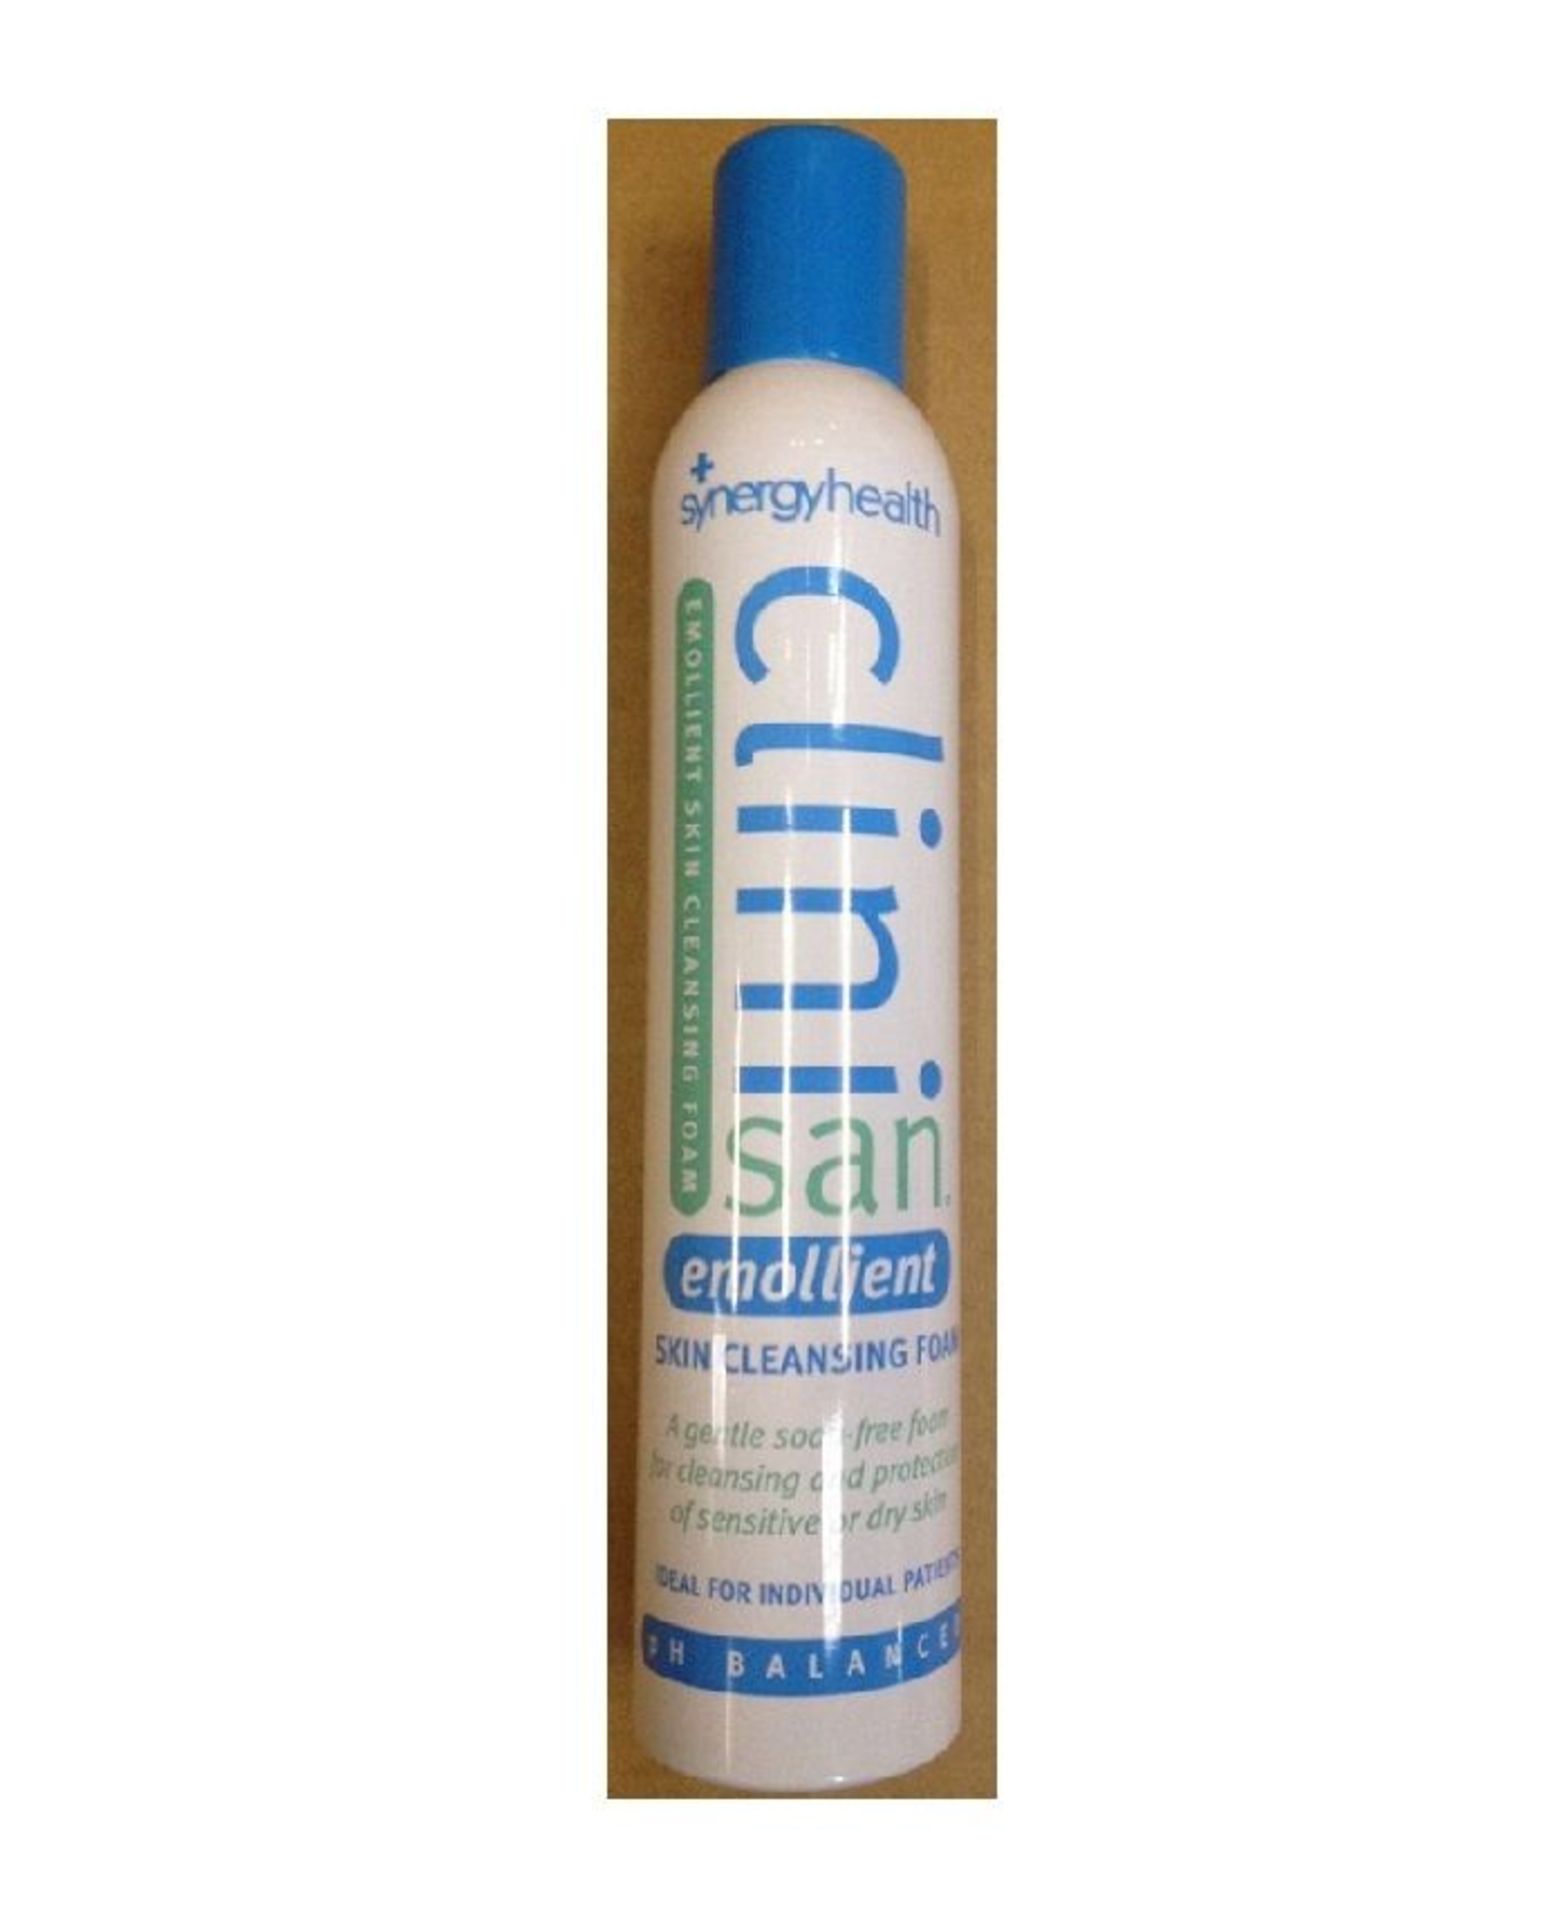 V Brand New Lot Of 3 Clinisan By Synergy Health Emollient Skin Cleansing Foam 400ml